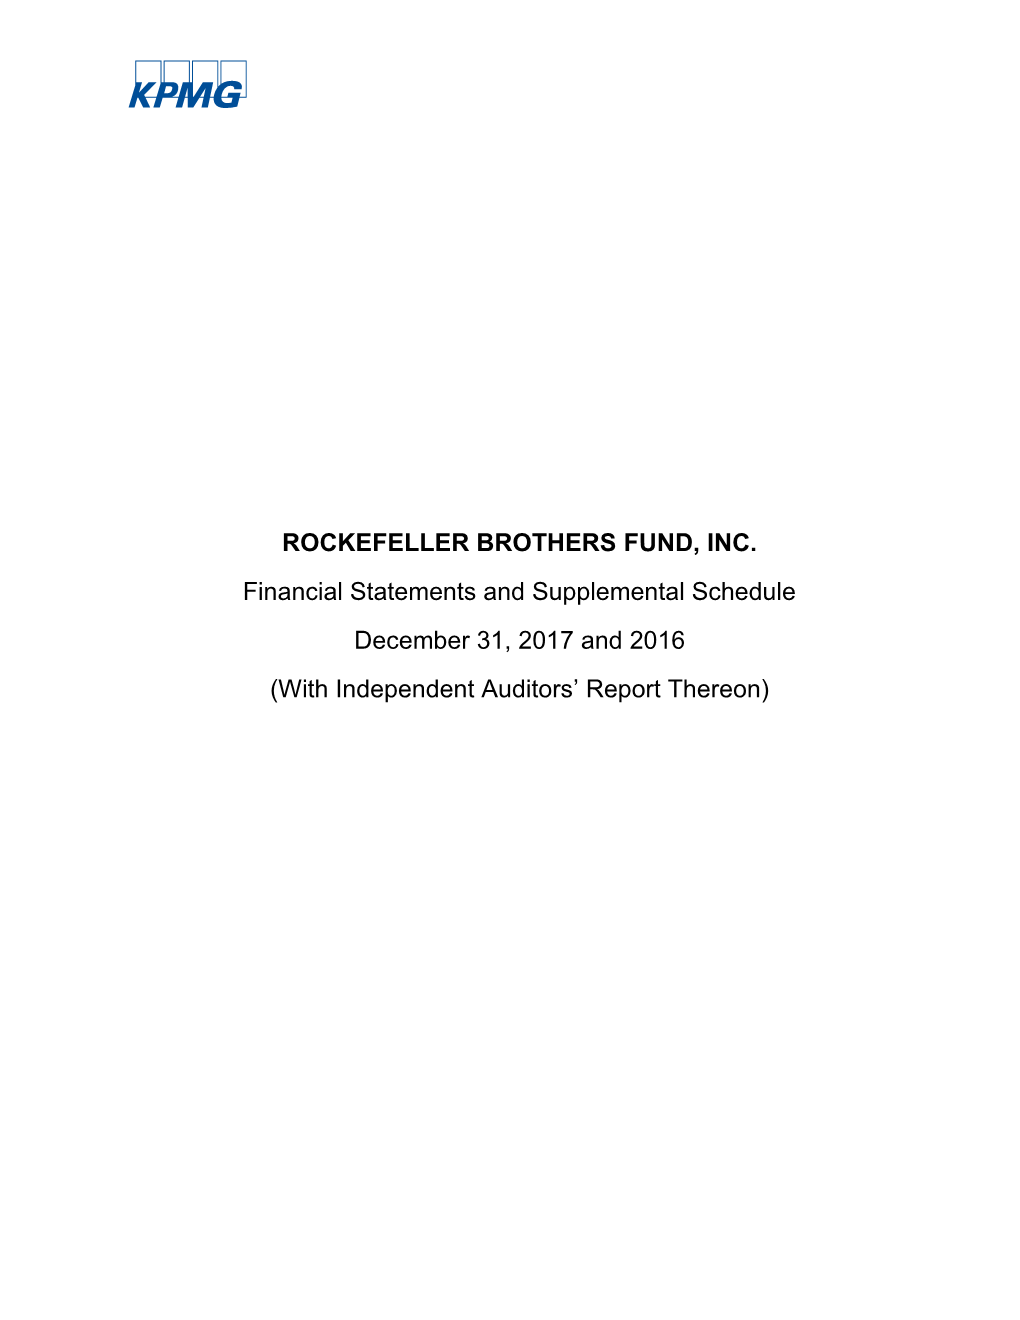 ROCKEFELLER BROTHERS FUND, INC. Financial Statements and Supplemental Schedule December 31, 2017 and 2016 (With Independent Auditors’ Report Thereon)